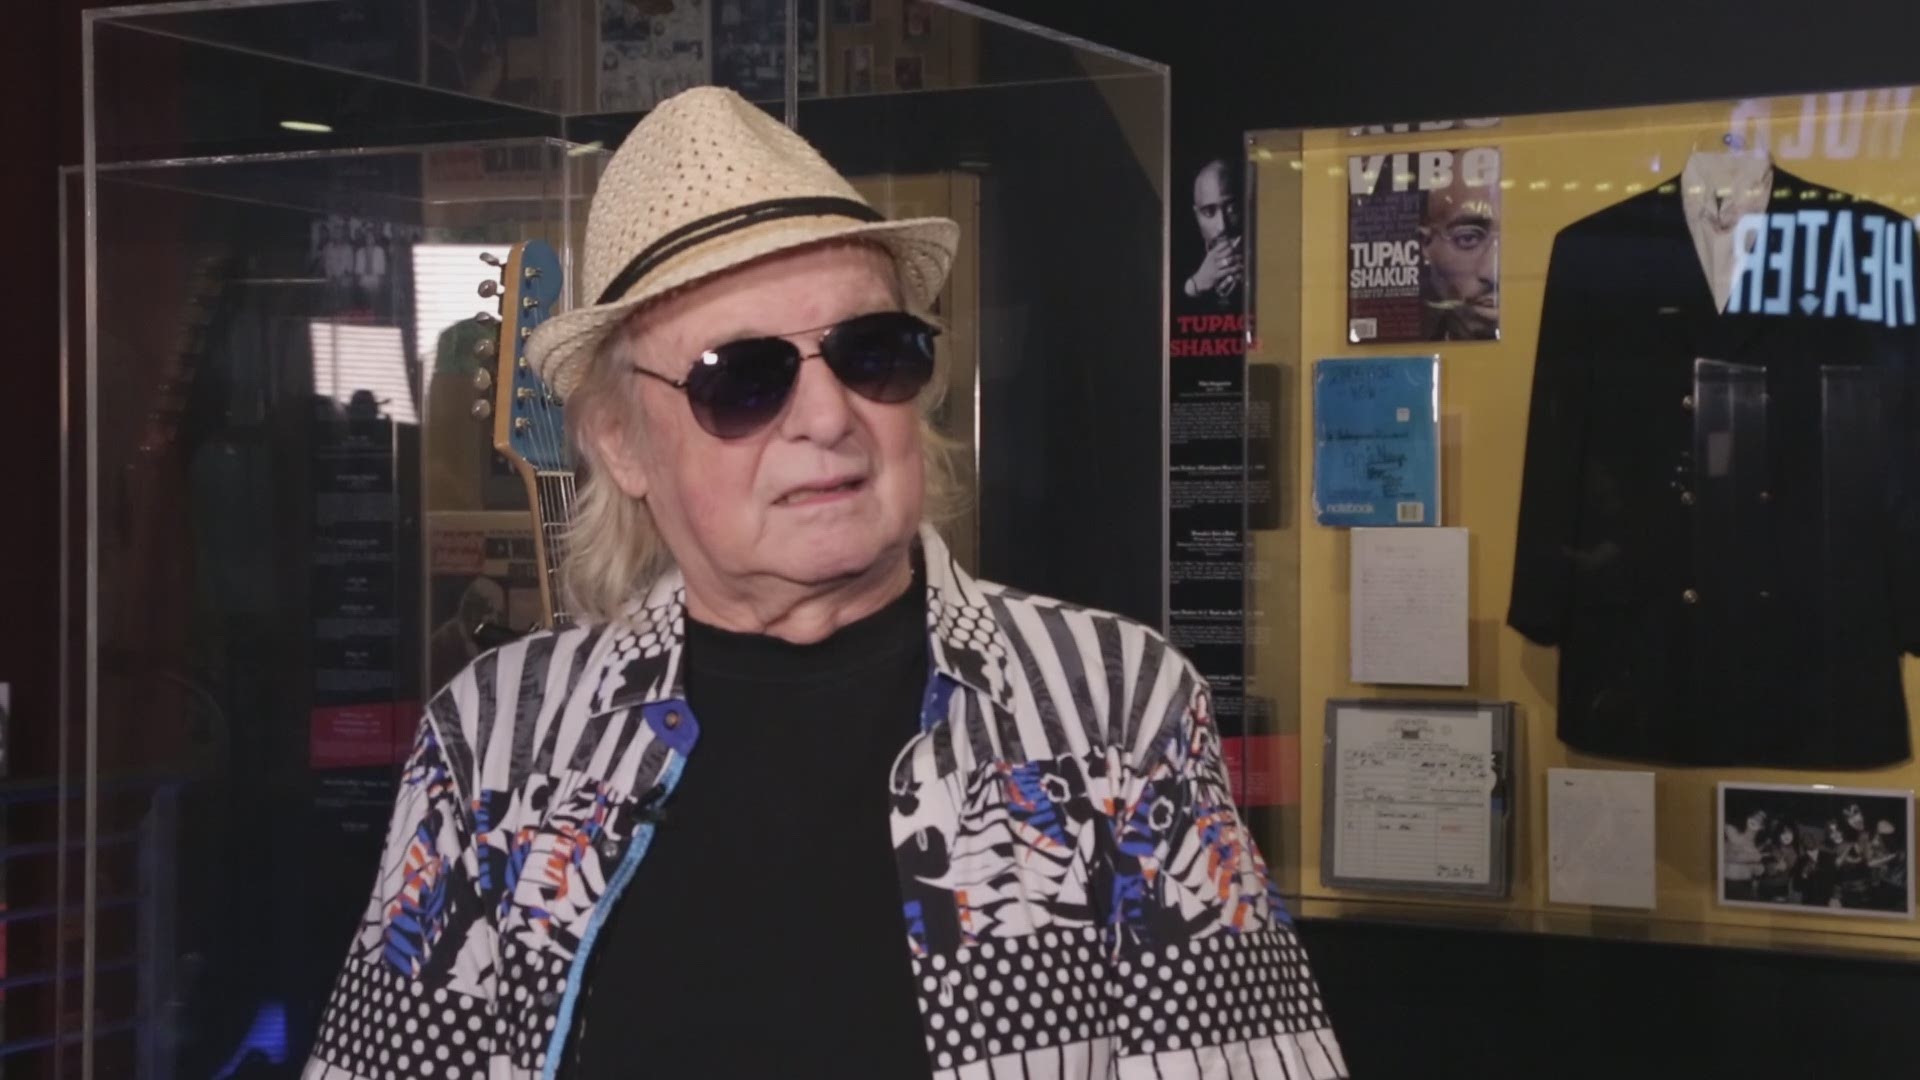 2017 Rock and Roll Hall of Fame Inductee Alan White of the progressive rock band YES dropped in at the Rock Hall this morning to donate some artifacts to the current exhibit recognizing this year's class of inductees.